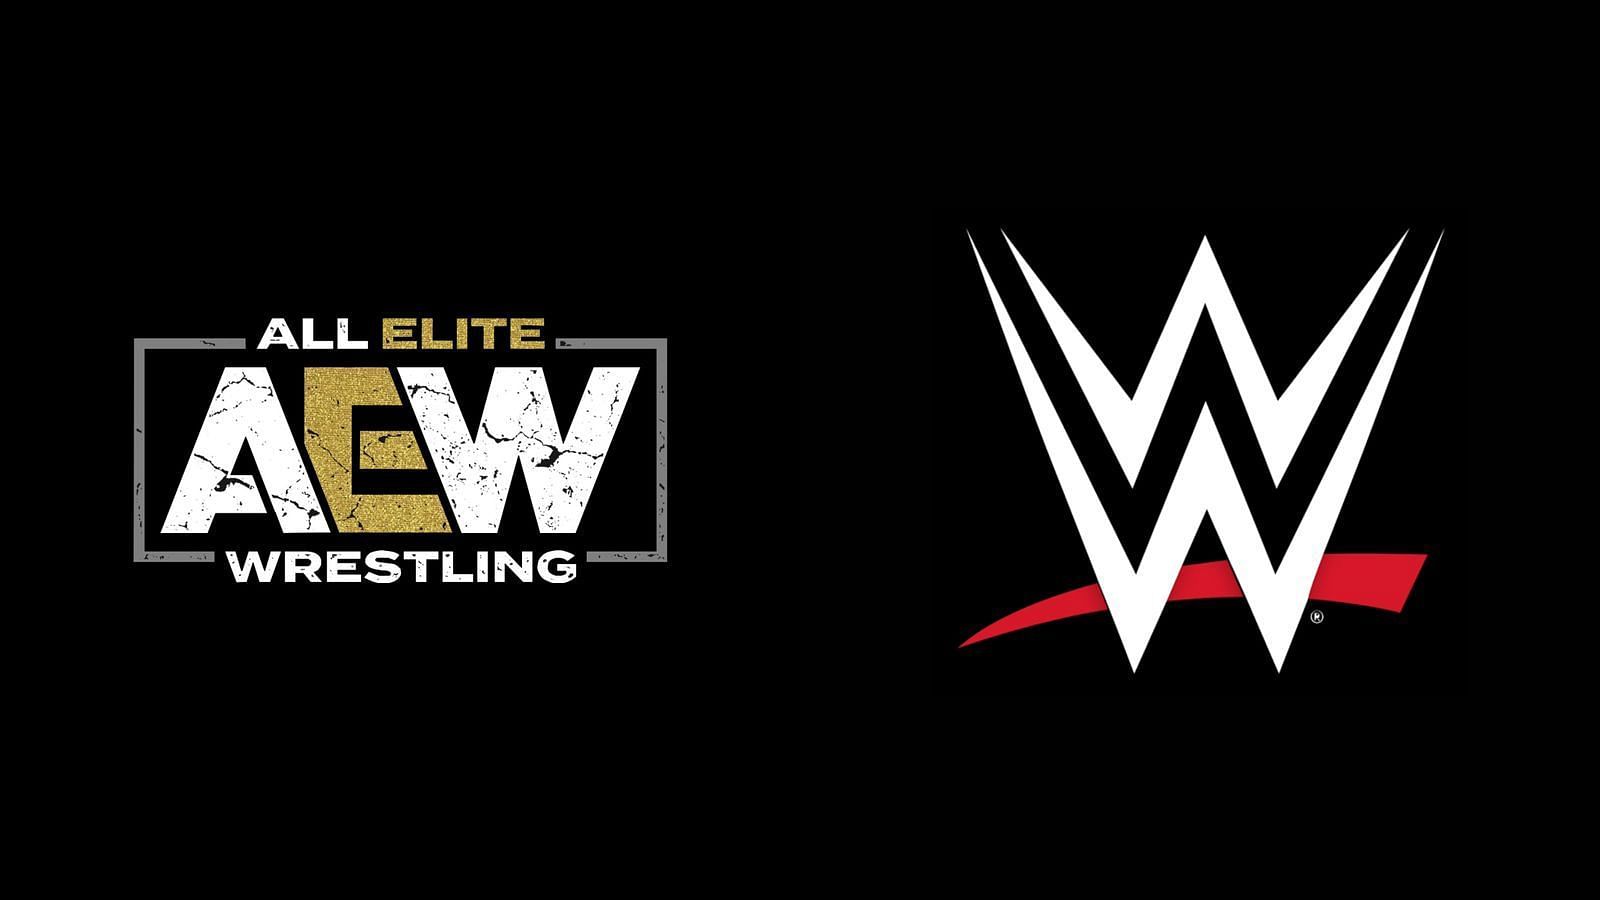 WWE veteran recently revealed that watching AEW was a waste of time